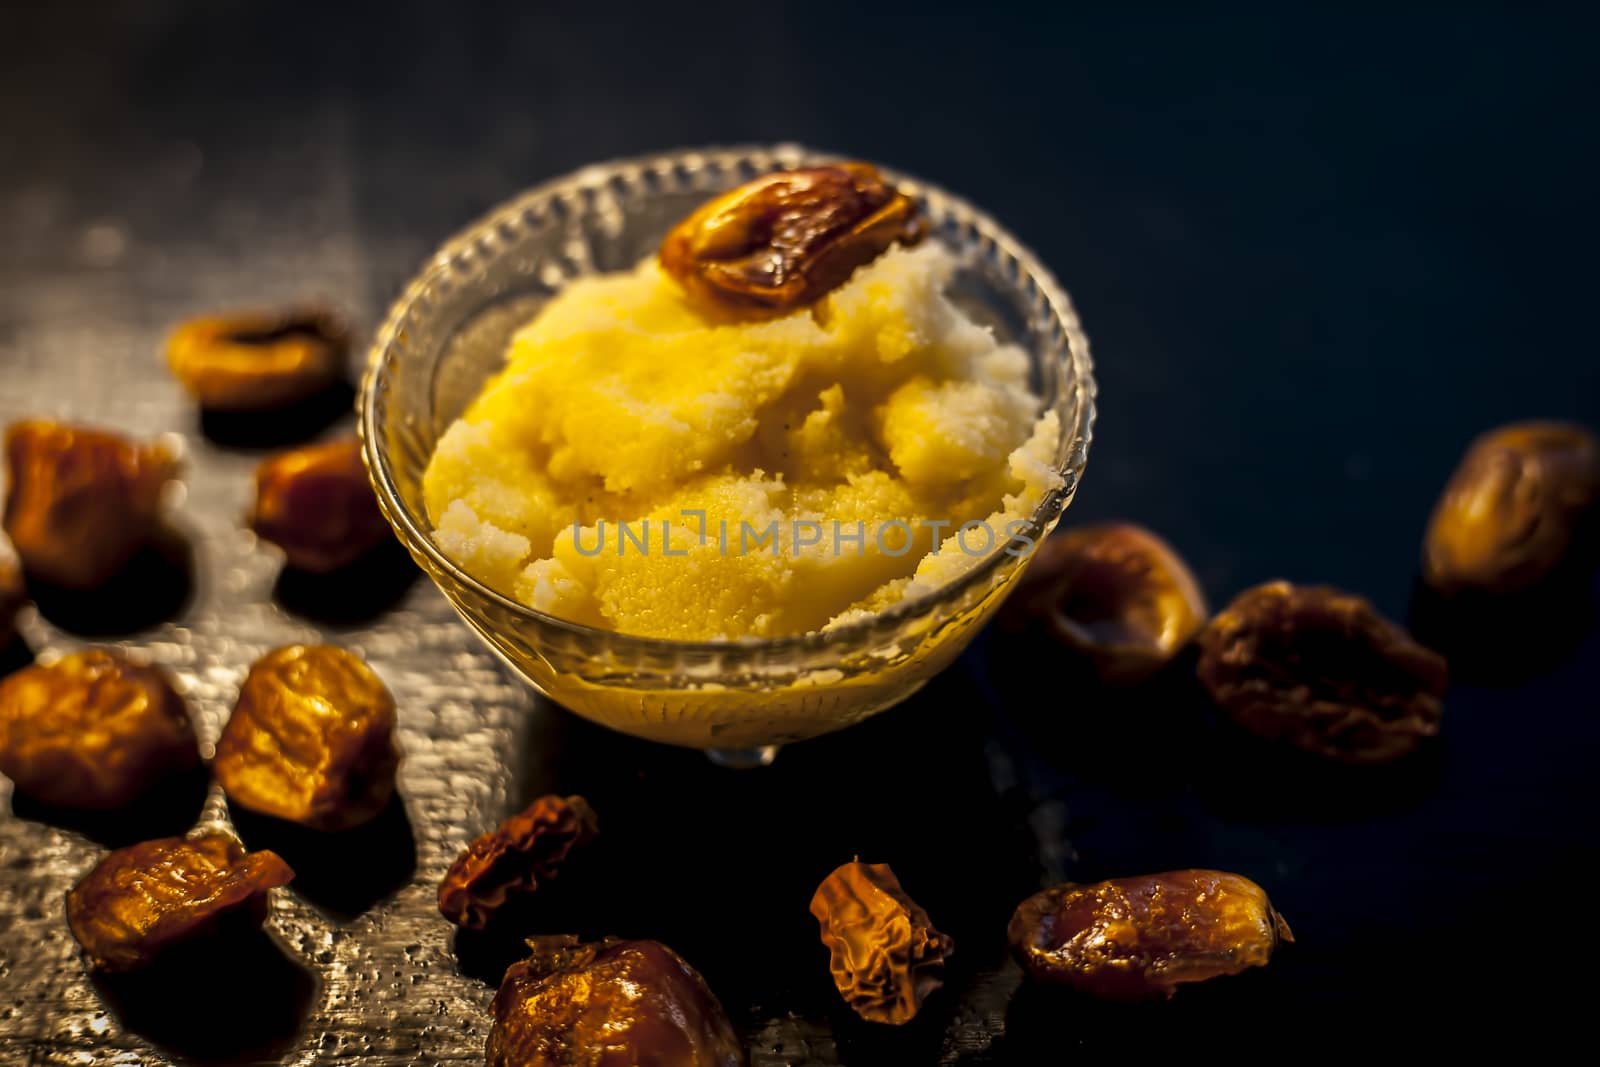 Close up shot of dates soaked in ghee for better stamina and health on black wooden surface along with ghee or clarified butter. Horizontal shot.